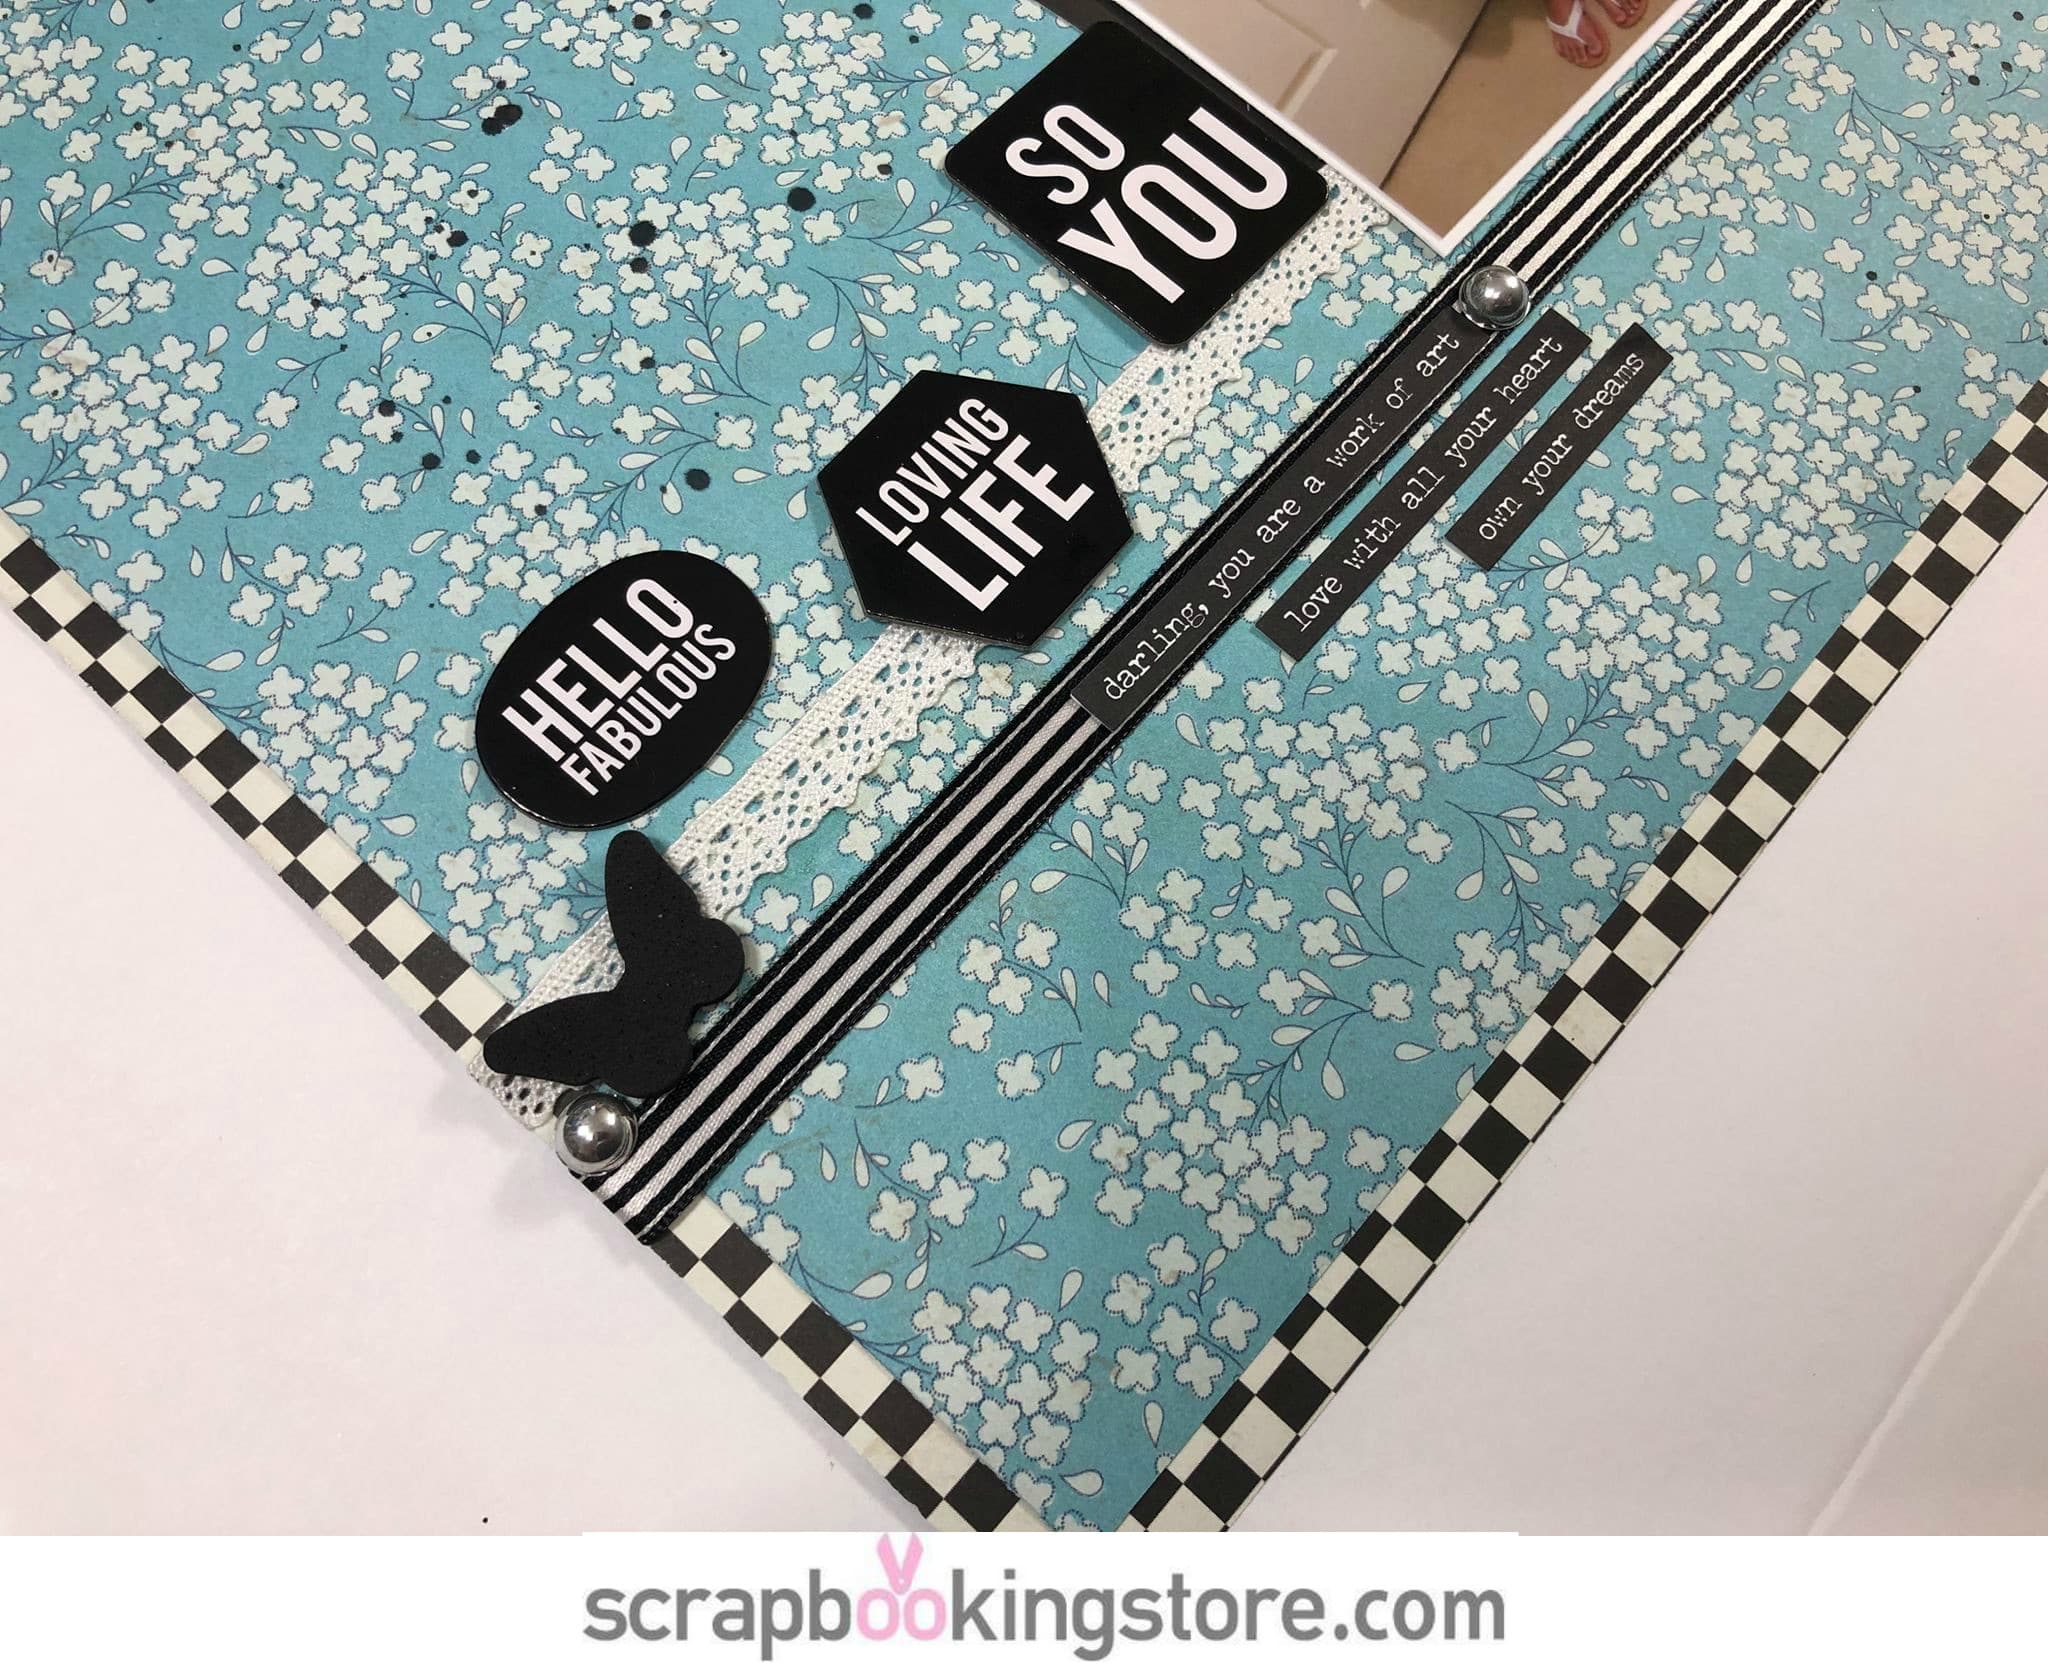 Monochromatic scrapbook layout by Becky using ScrapbookingStore April 2019 monthly kit with a girl photo